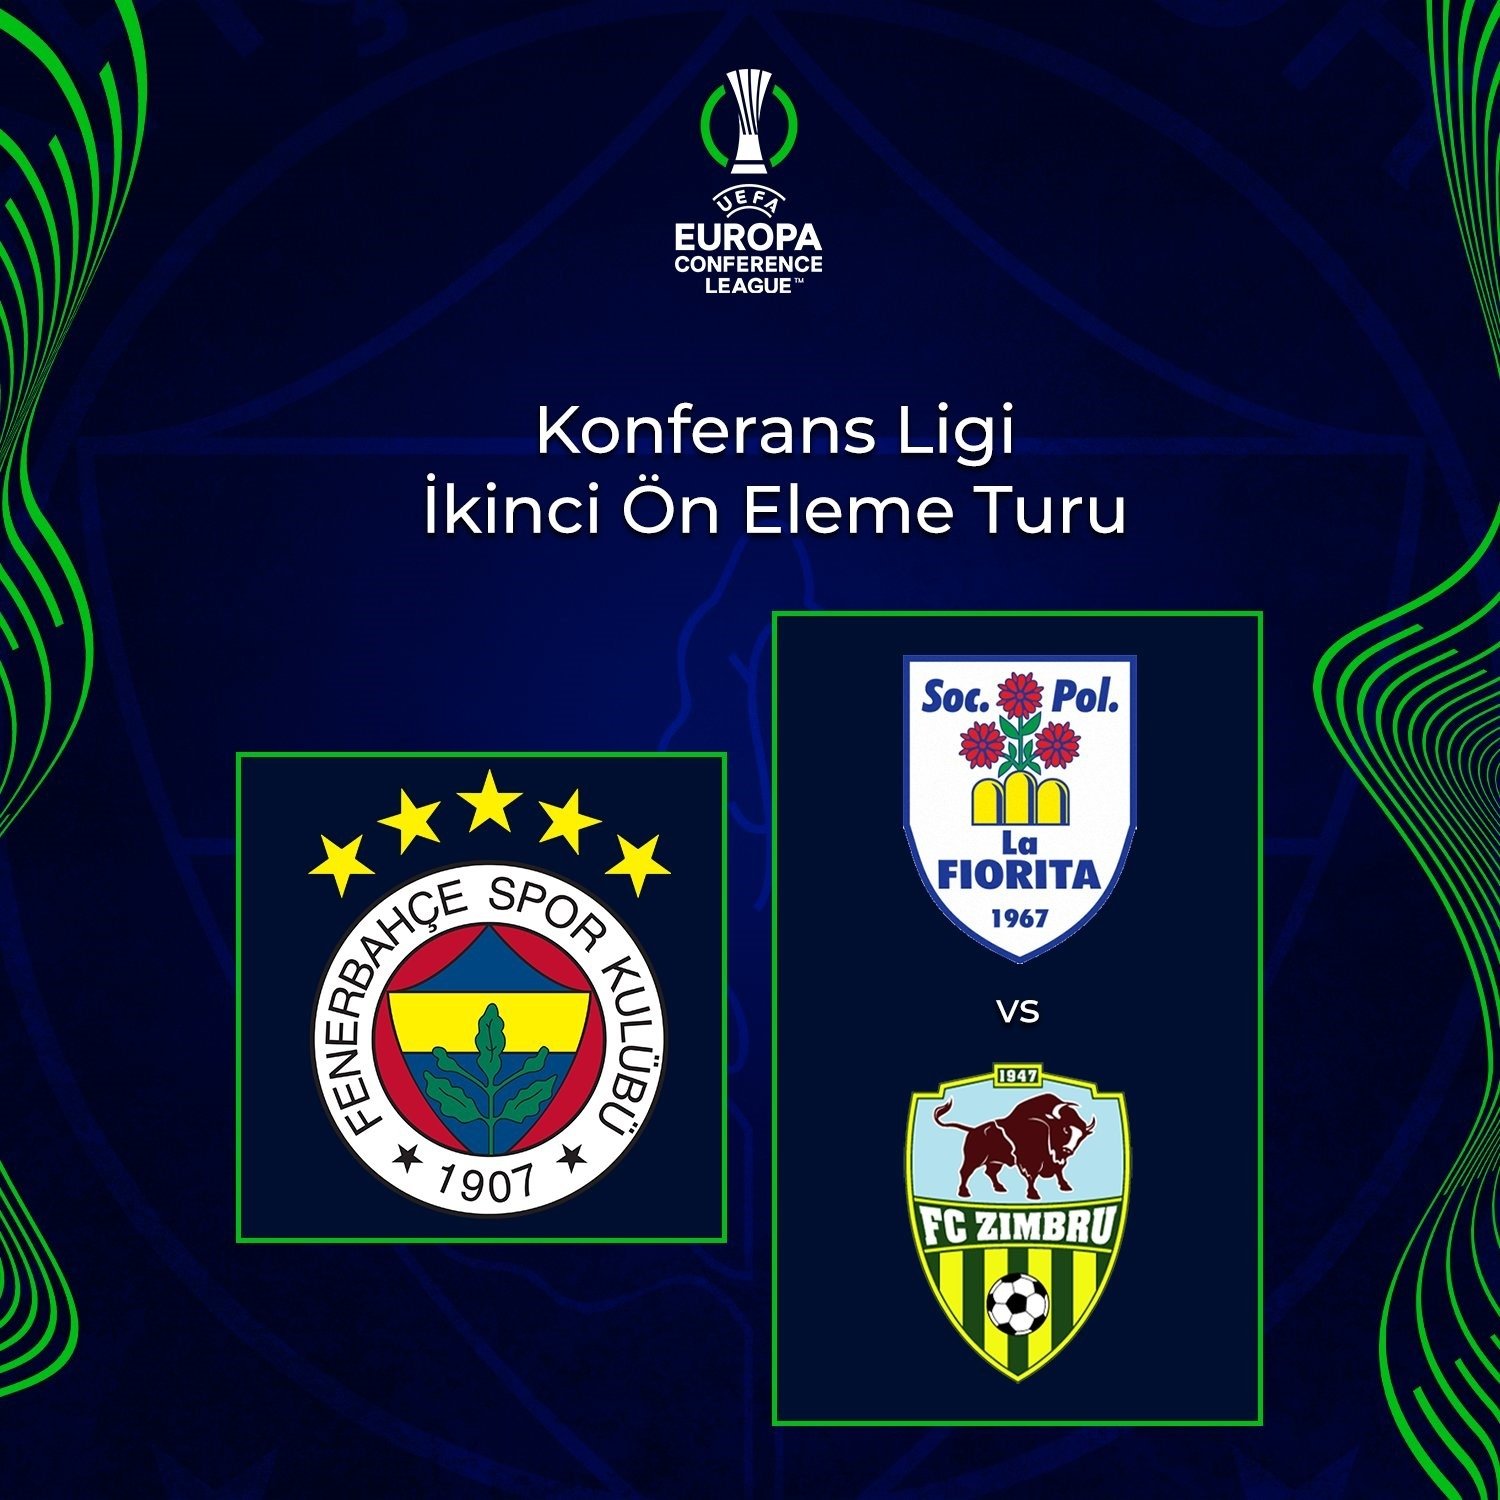 Fenerbahçe, Beşiktaş go all in for early Conference League groups